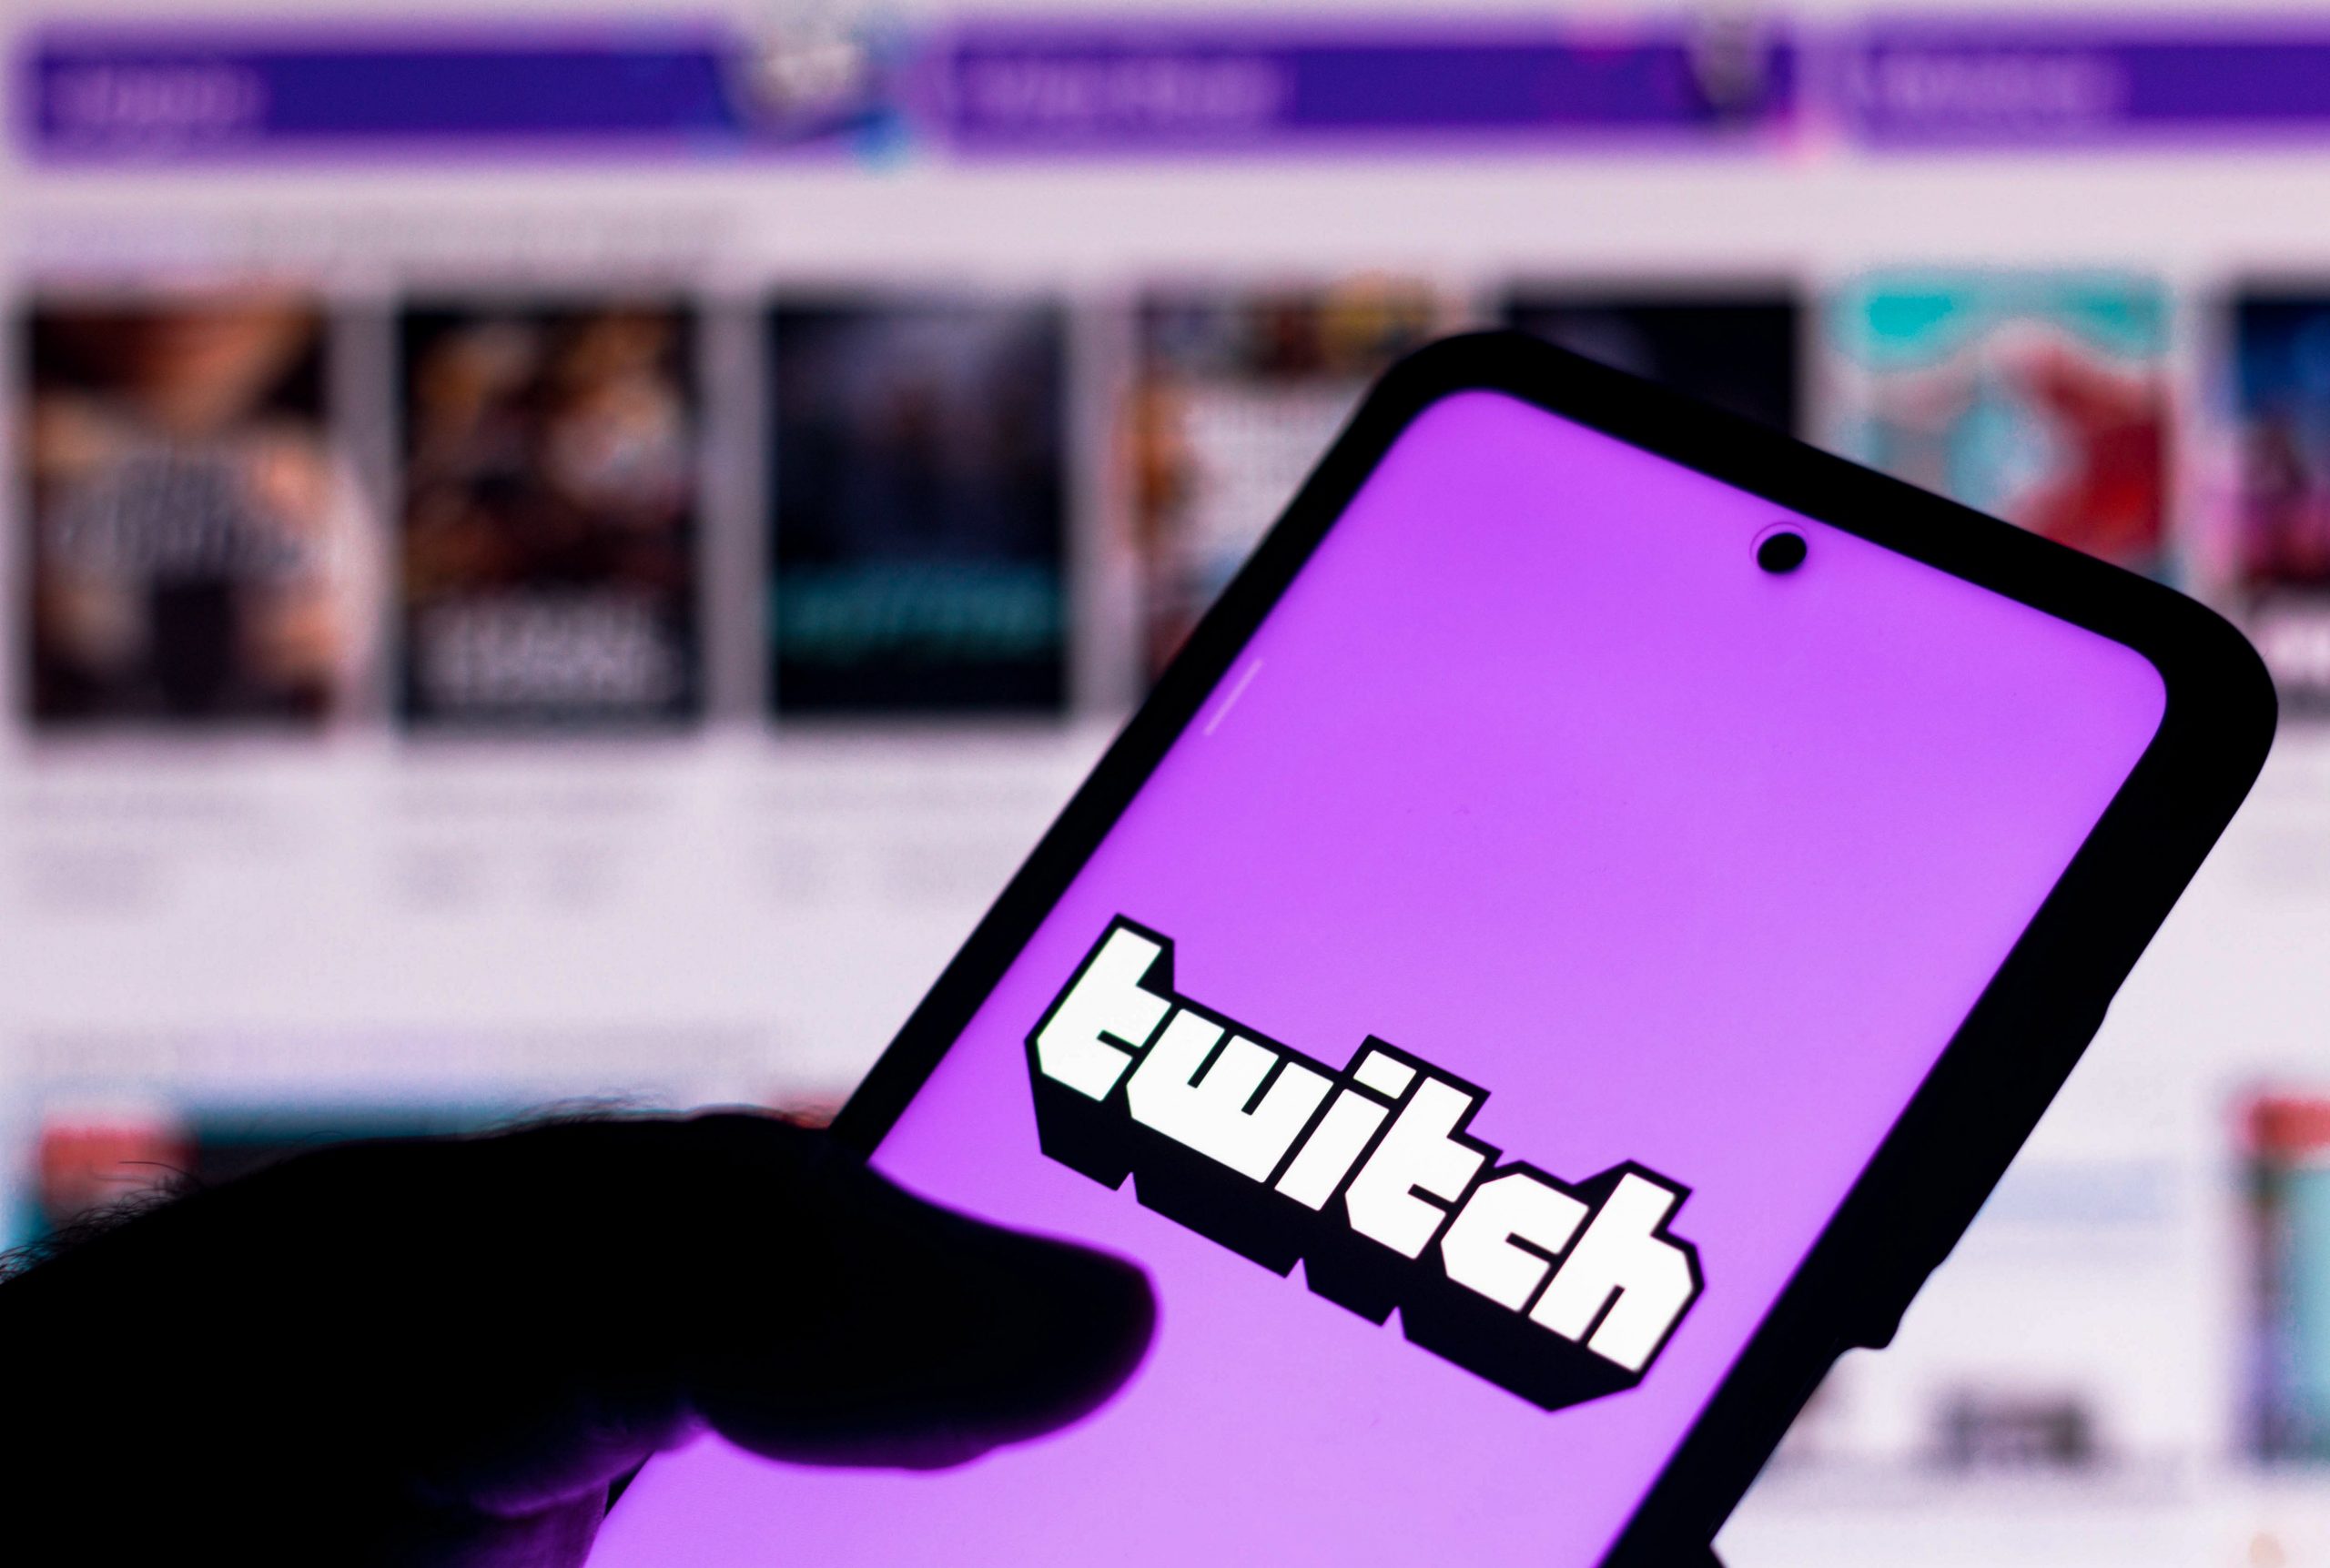 Twitch app on a smartphone